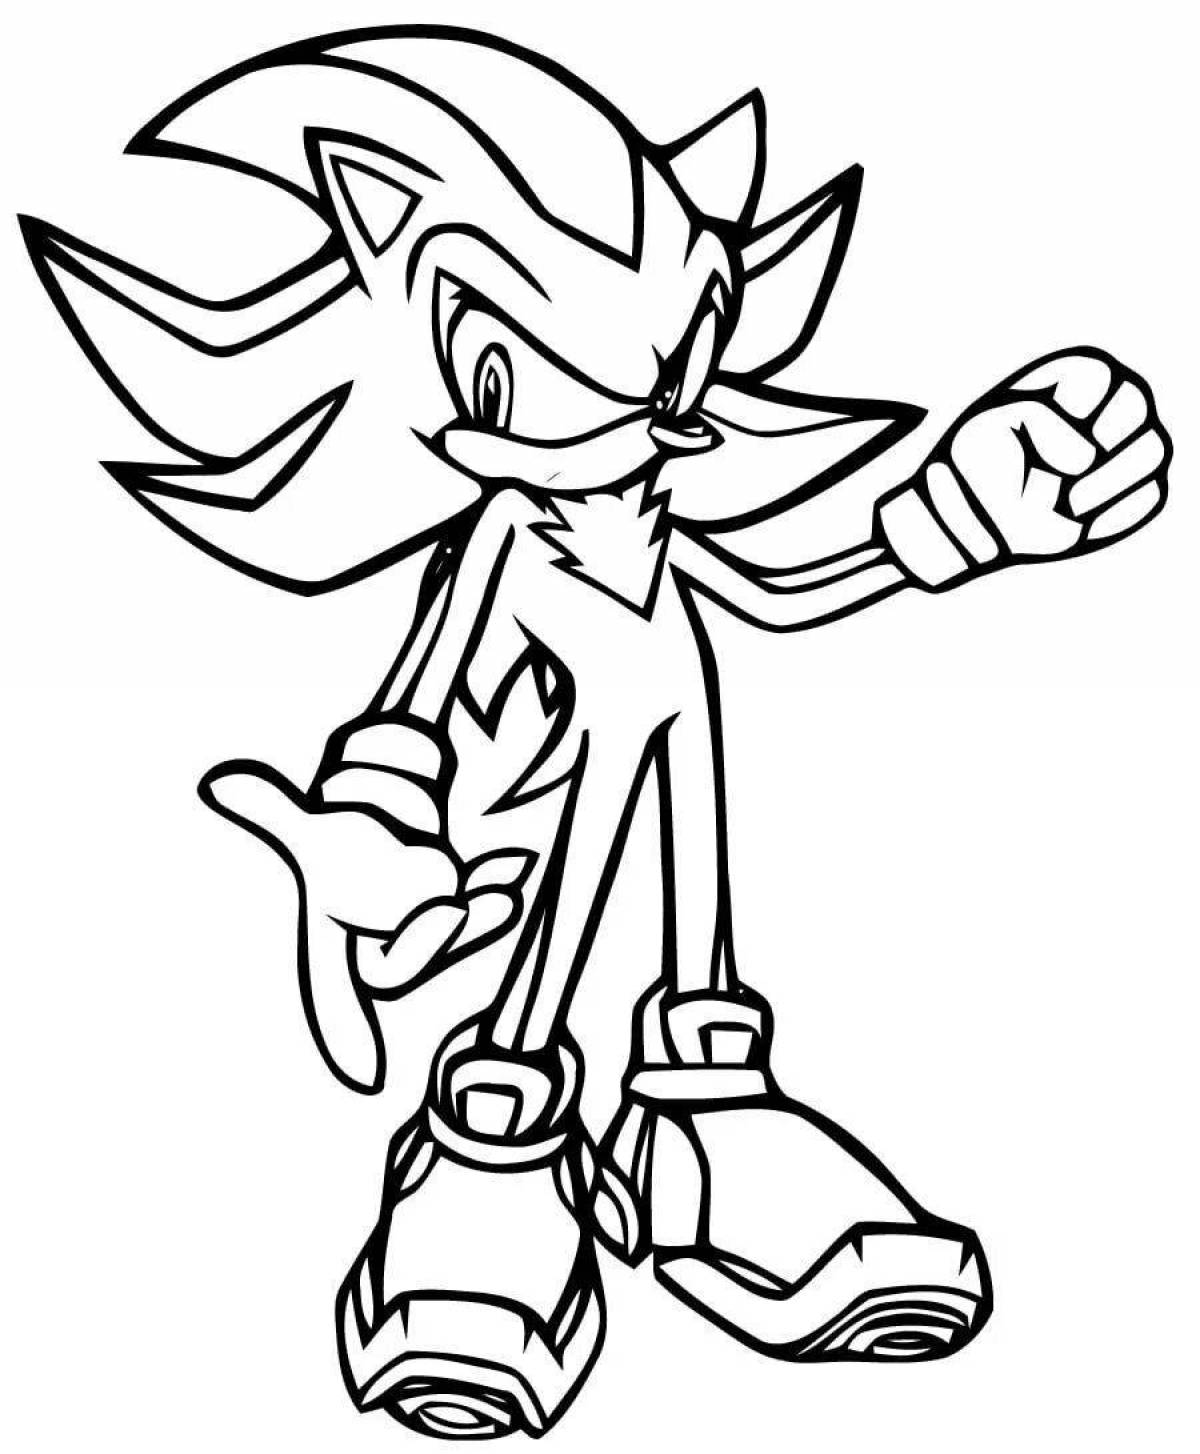 Sonic Egzy's wonderful coloring book